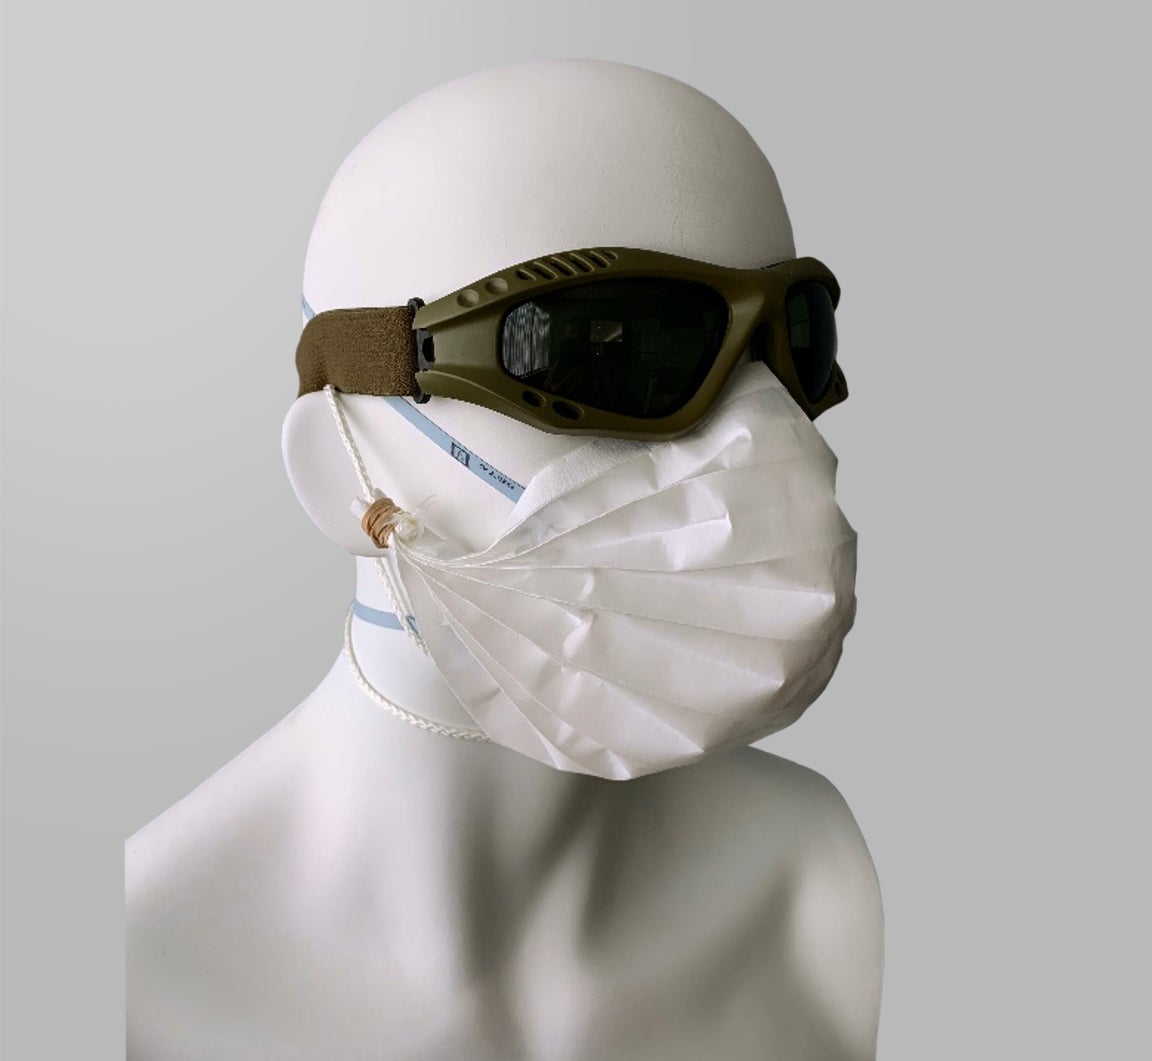 Mannequin in PPE